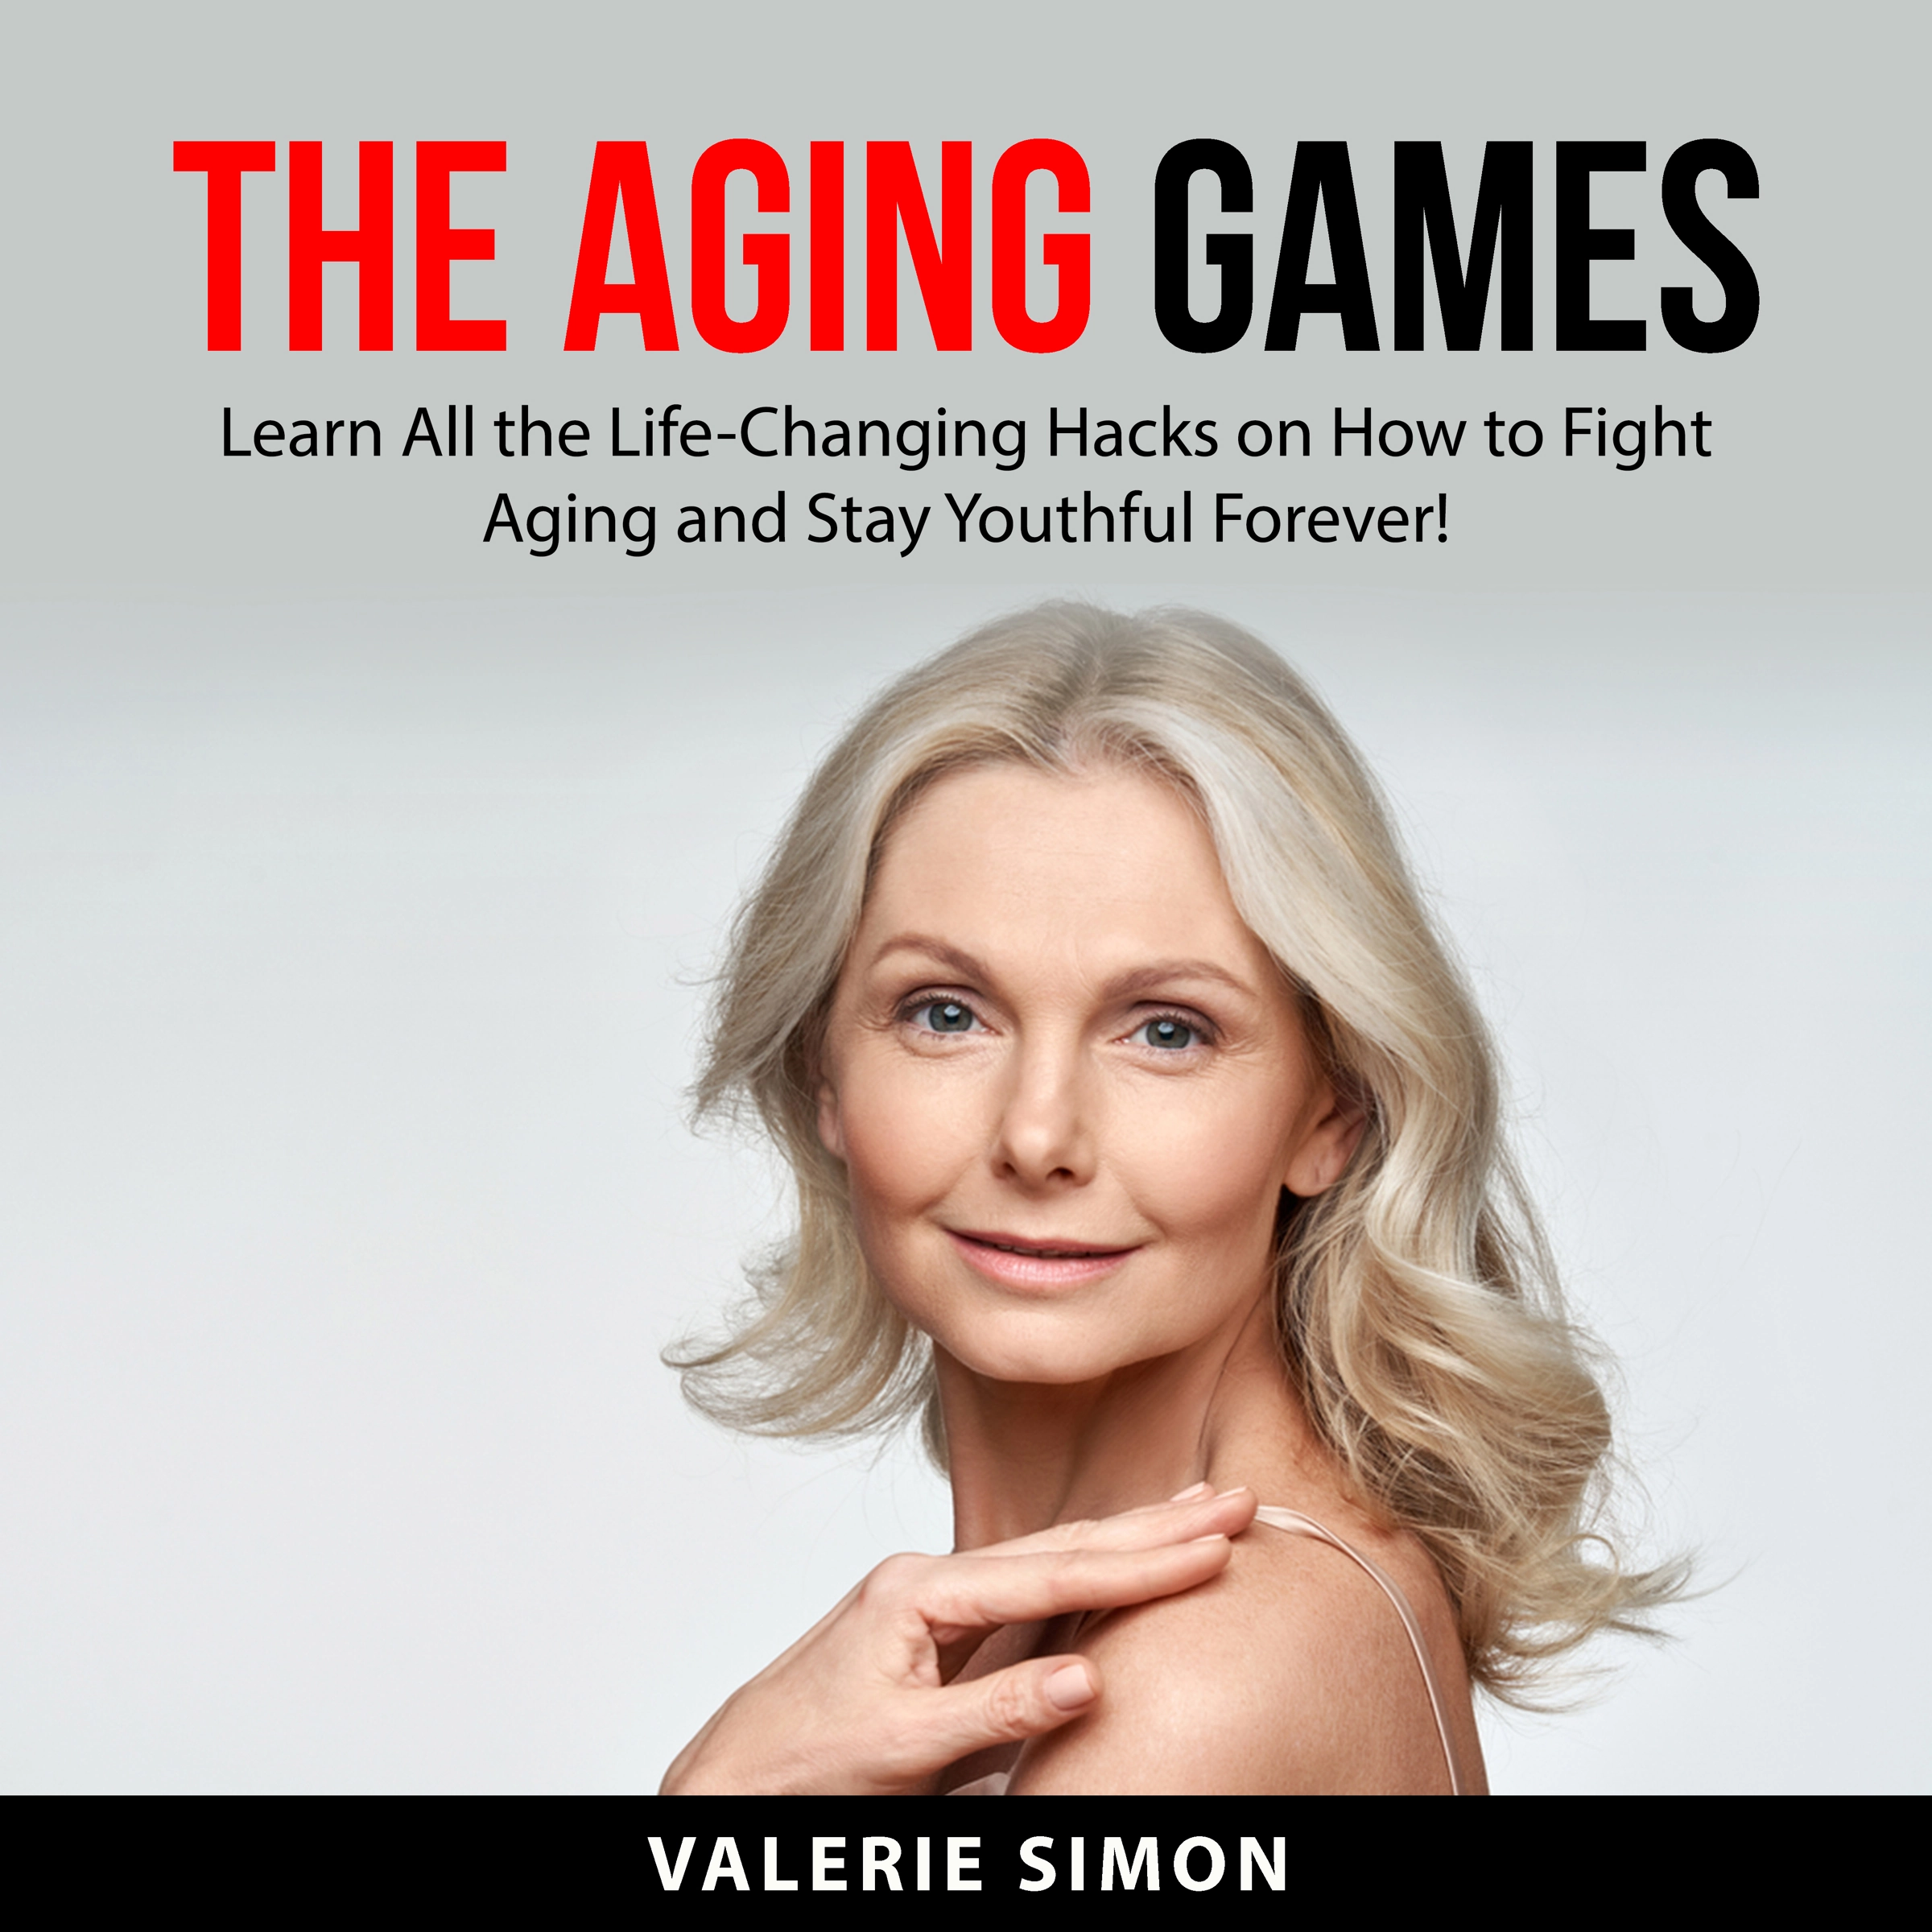 The Aging Games Audiobook by Valerie Simon